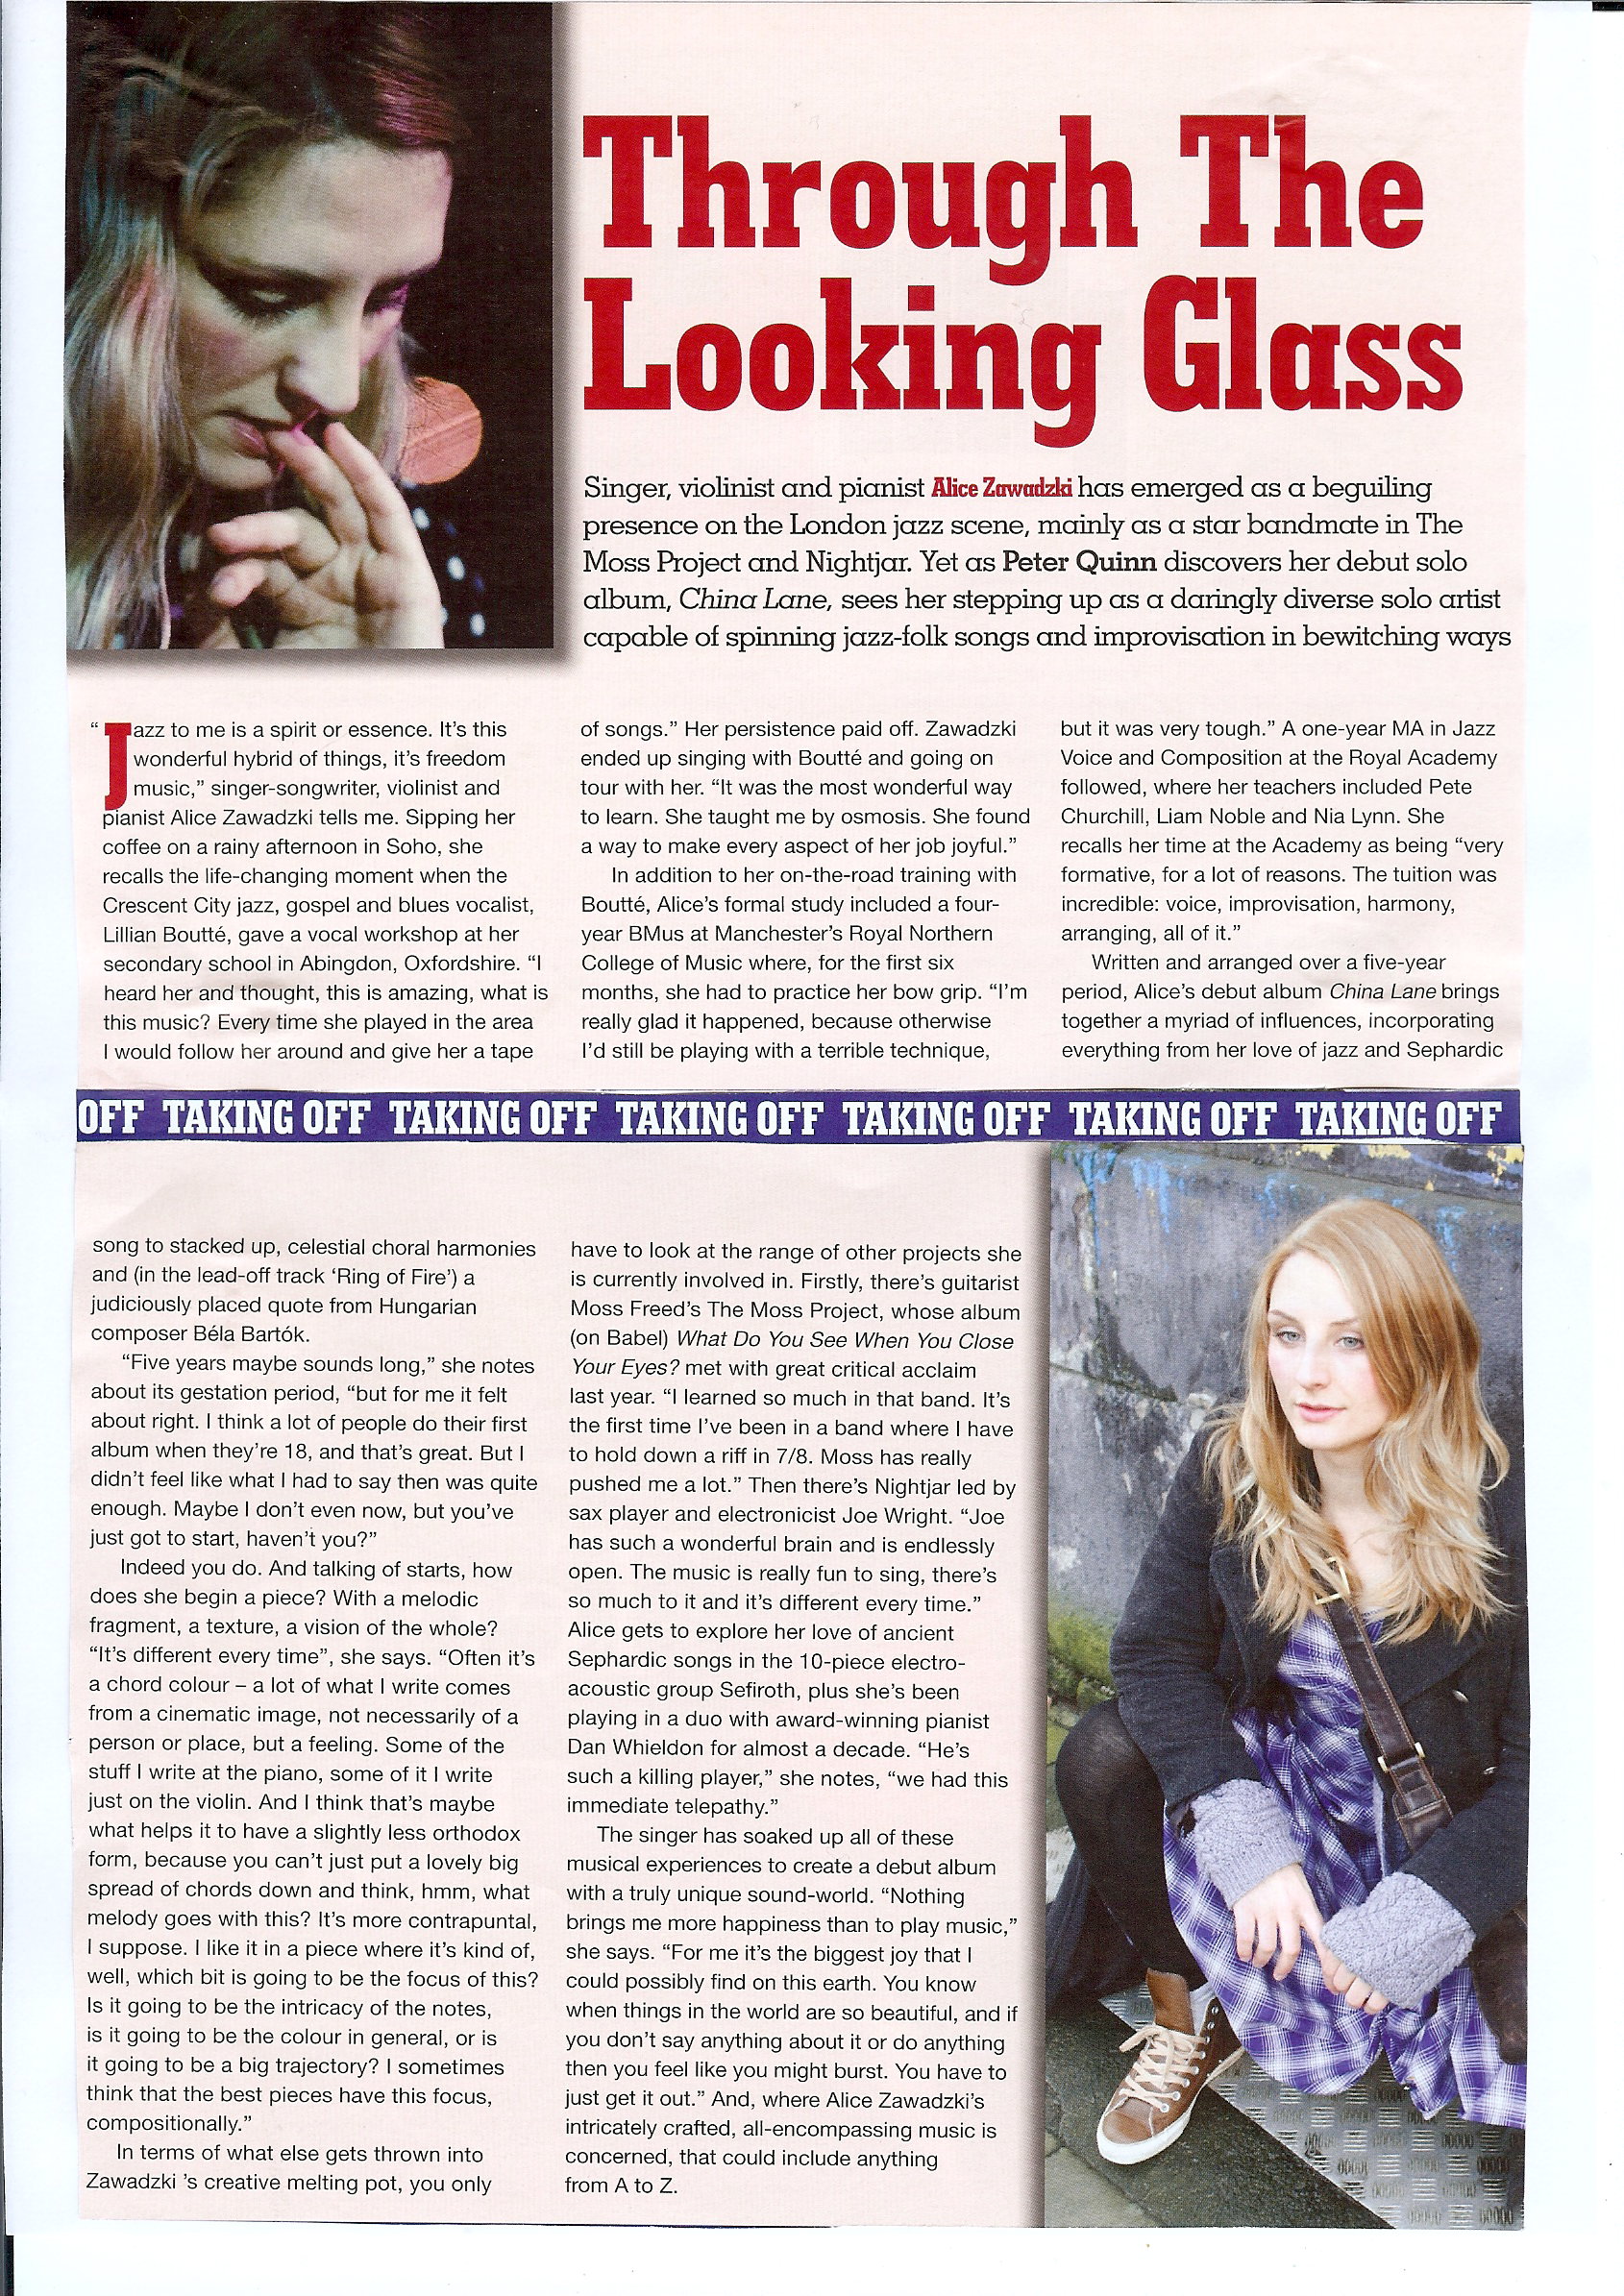 Jazzwise Sept 2014 - Taking Off